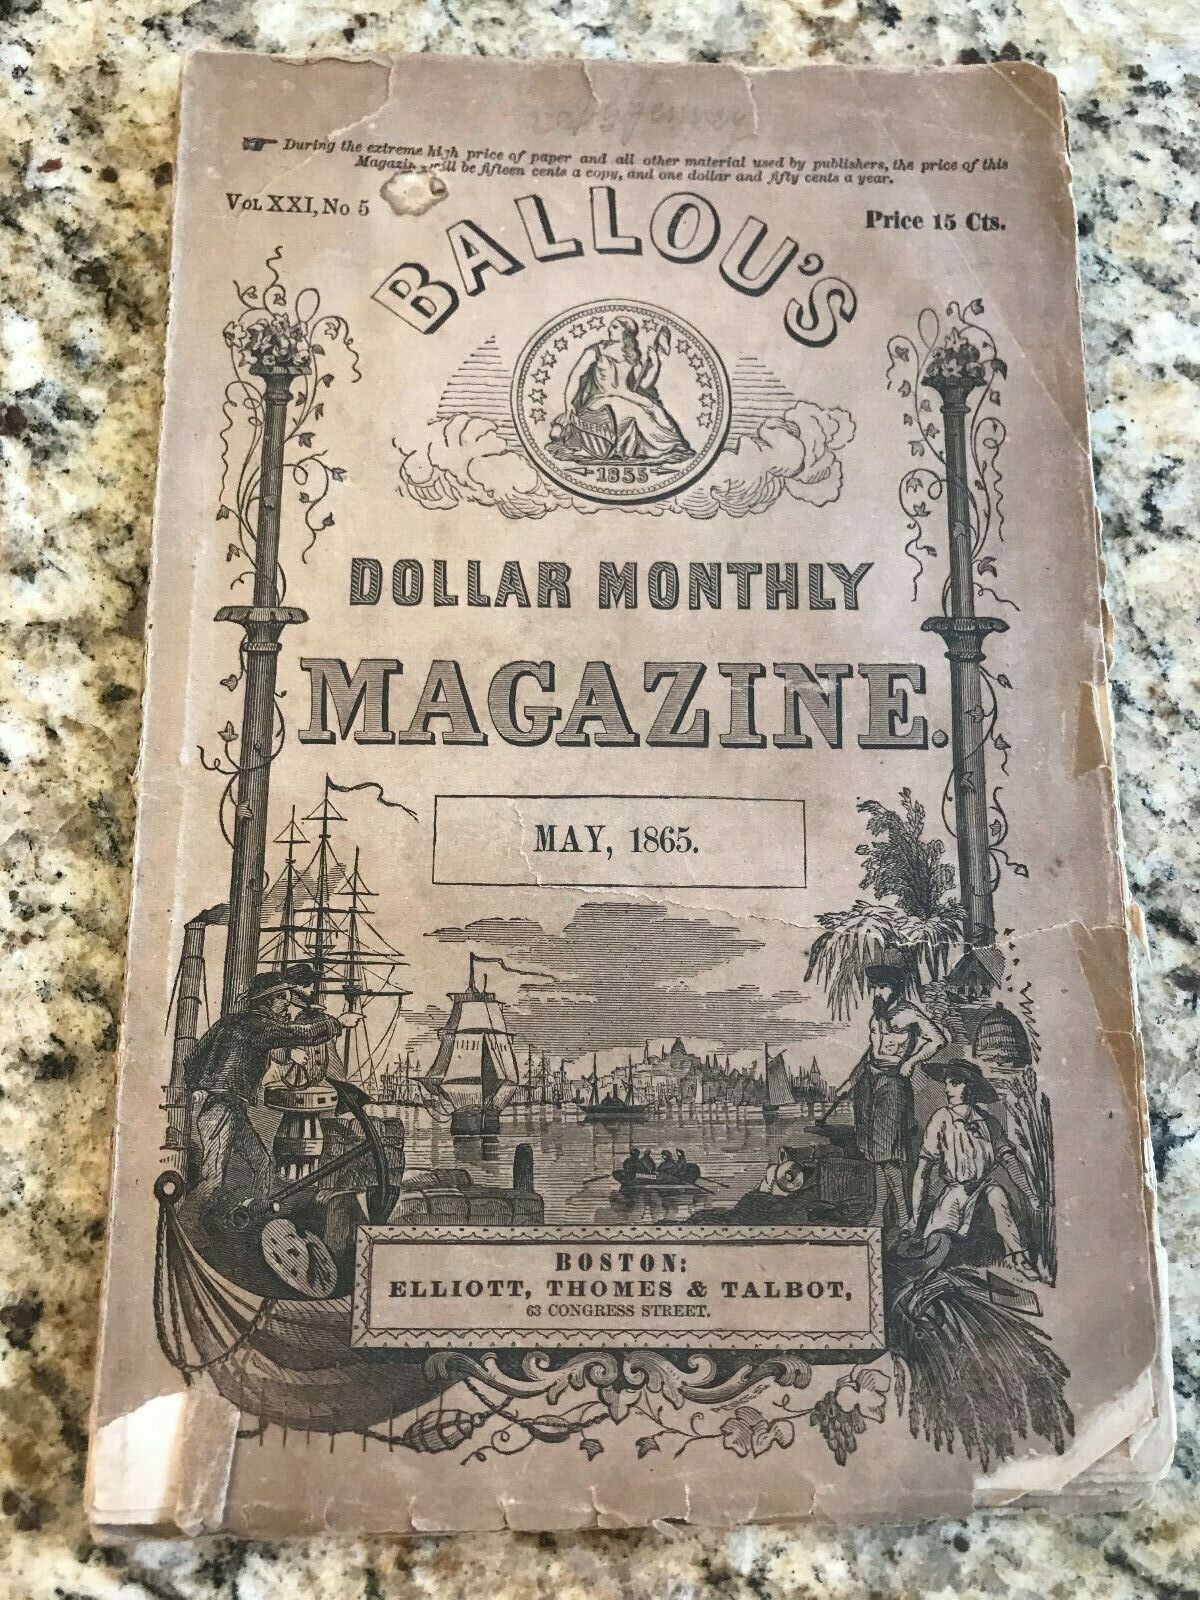 Ballou\'s Dollar Monthly Magazine Published in Boston - May, 1865 No. 125 Issue